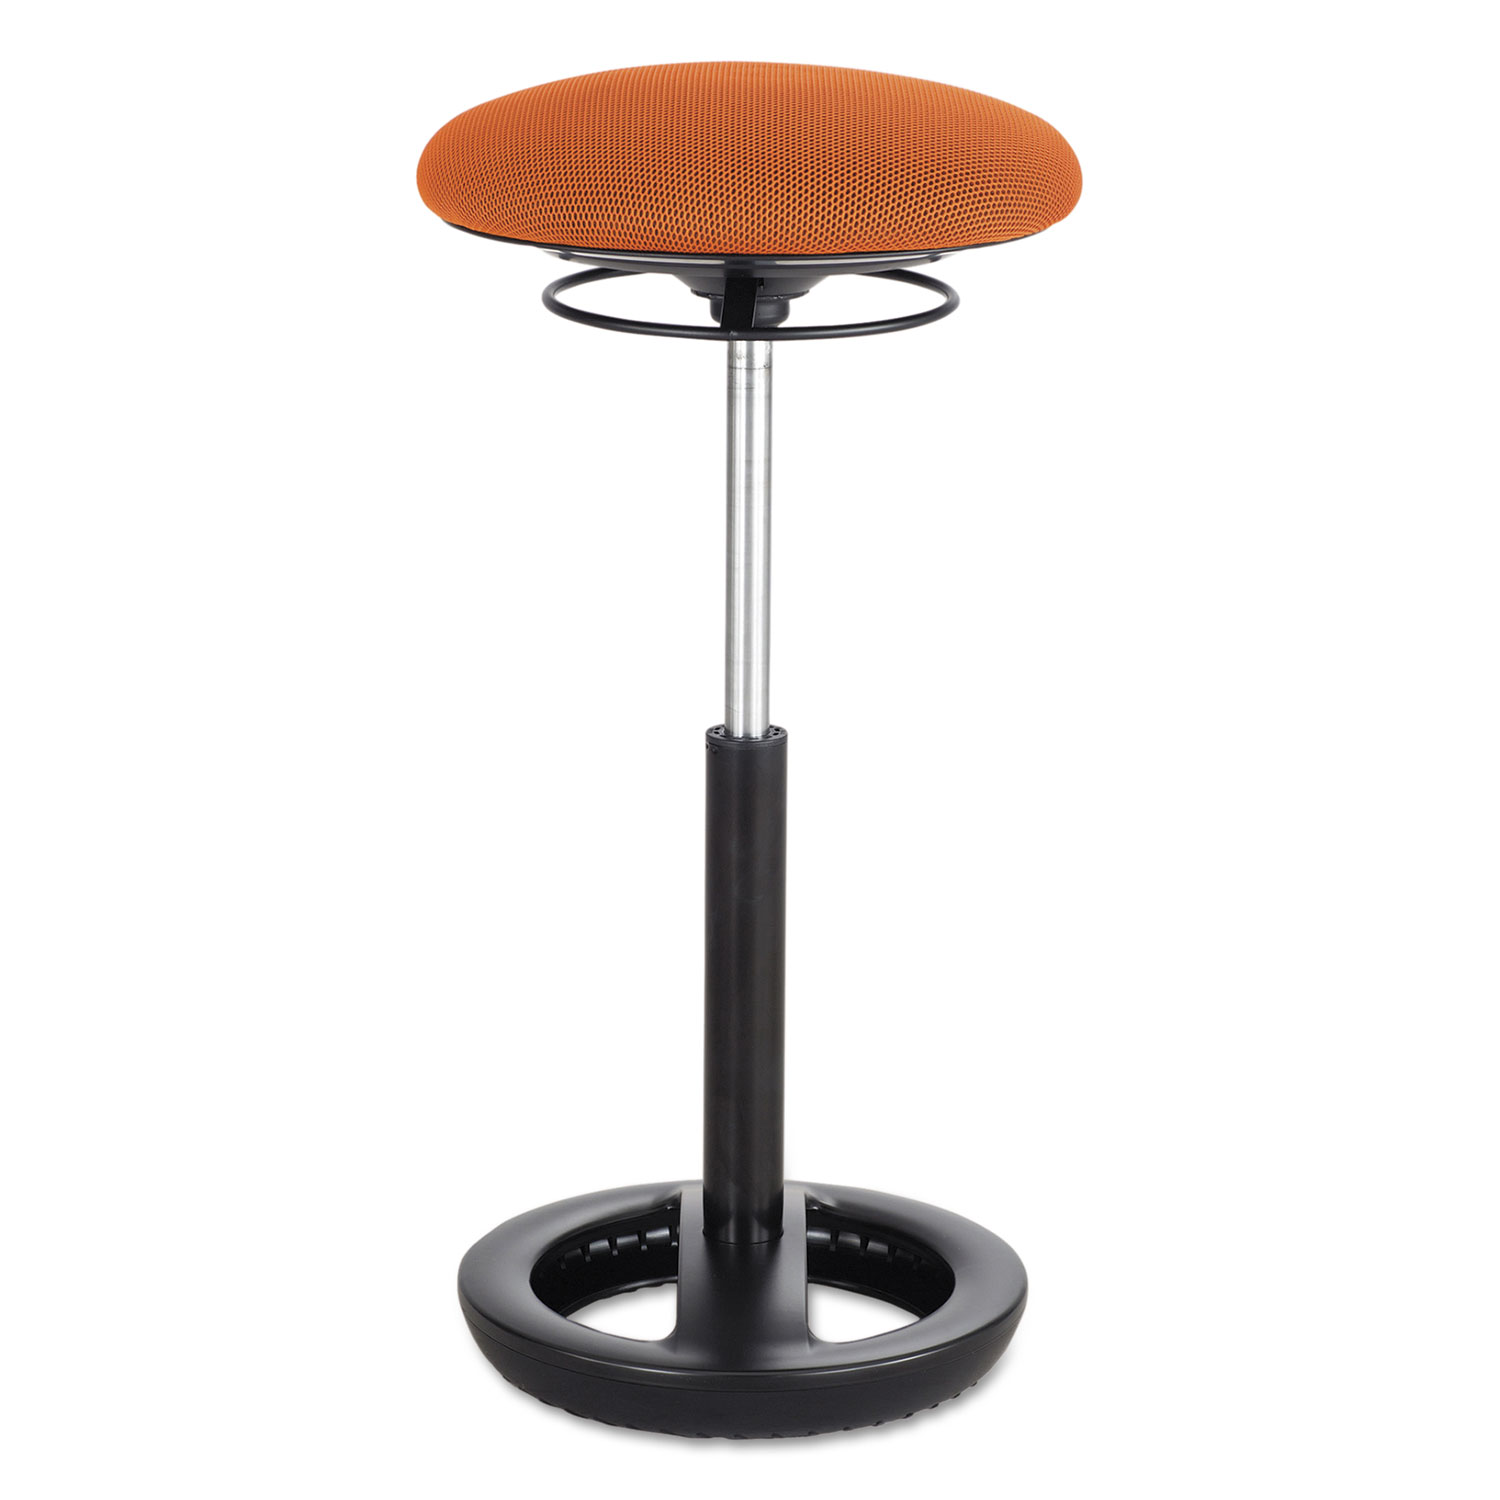 Twixt Extended-Height Ergonomic Chair, Supports up to 250 lbs., Orange Seat/Orange Back, Black Base